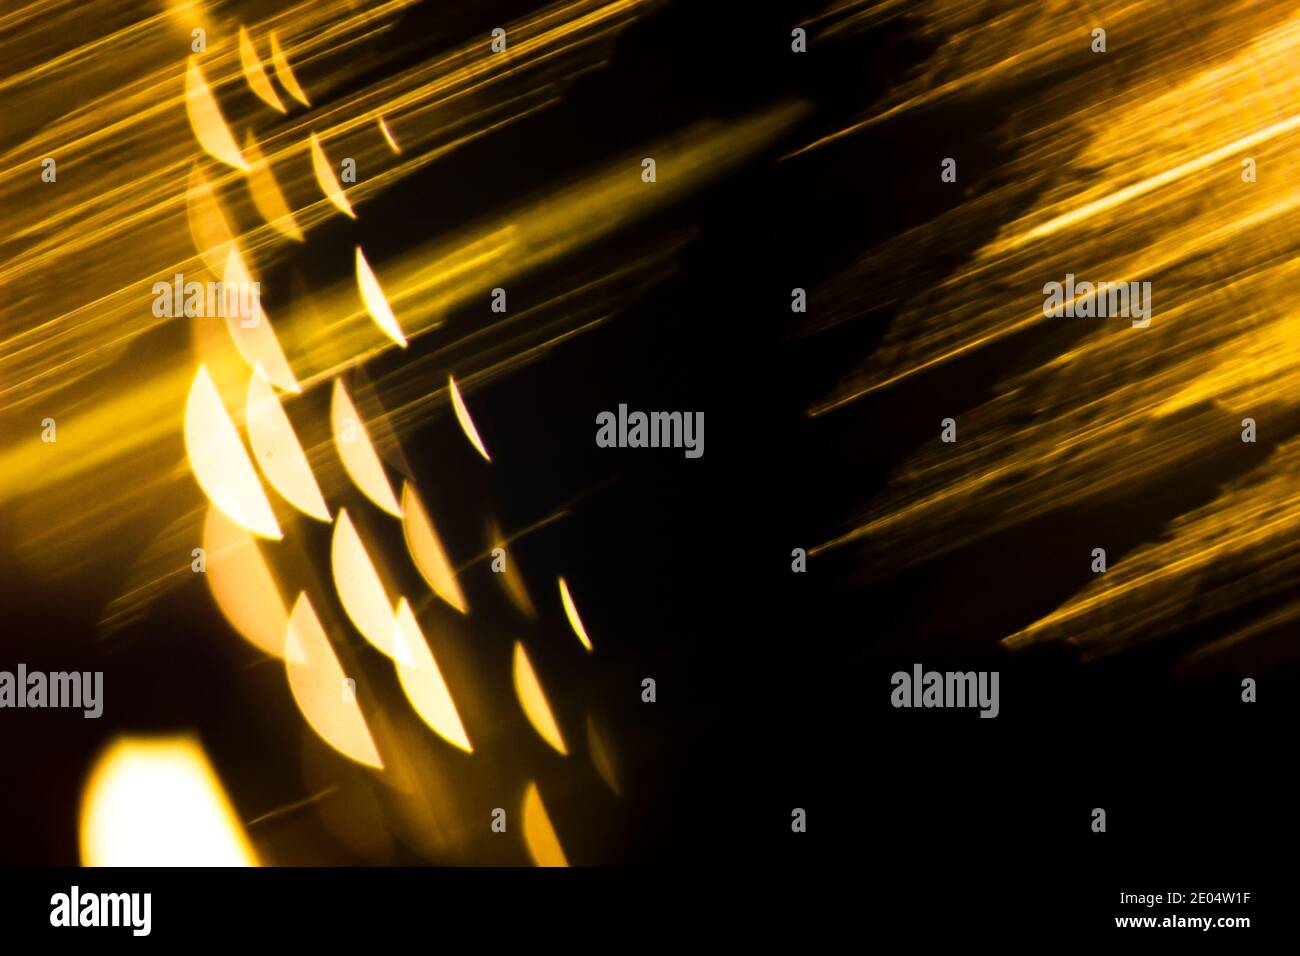 Abstract illuminating golden backdround with linear and spherical shapes. Isolated black background for text entry Stock Photo